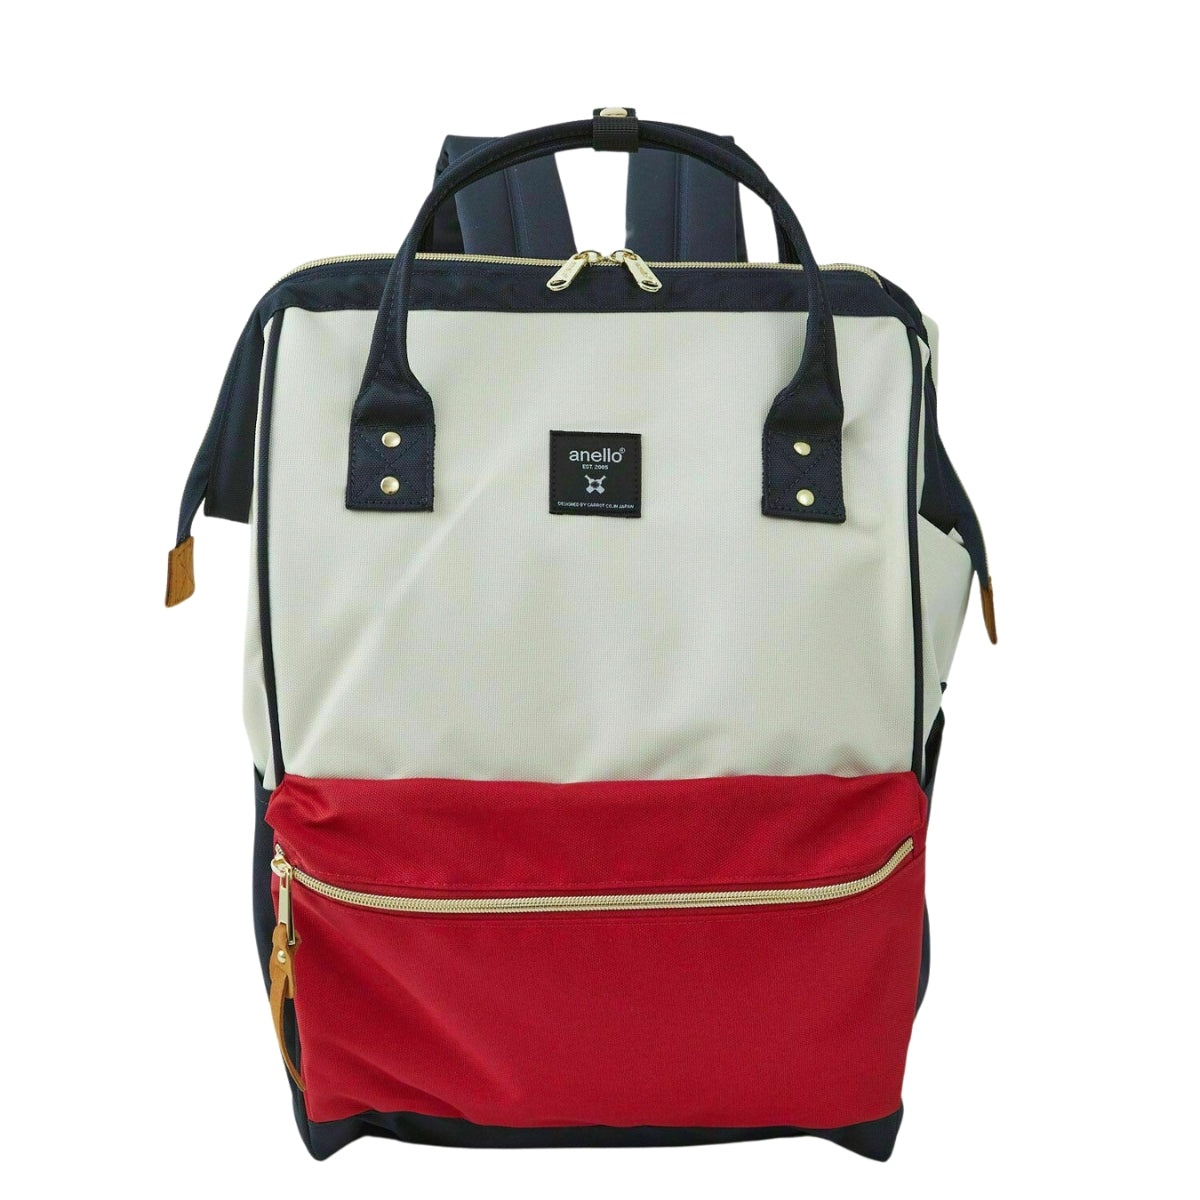 Anello Small Backpack NEW FROM JAPAN for Sale in Aiea, HI